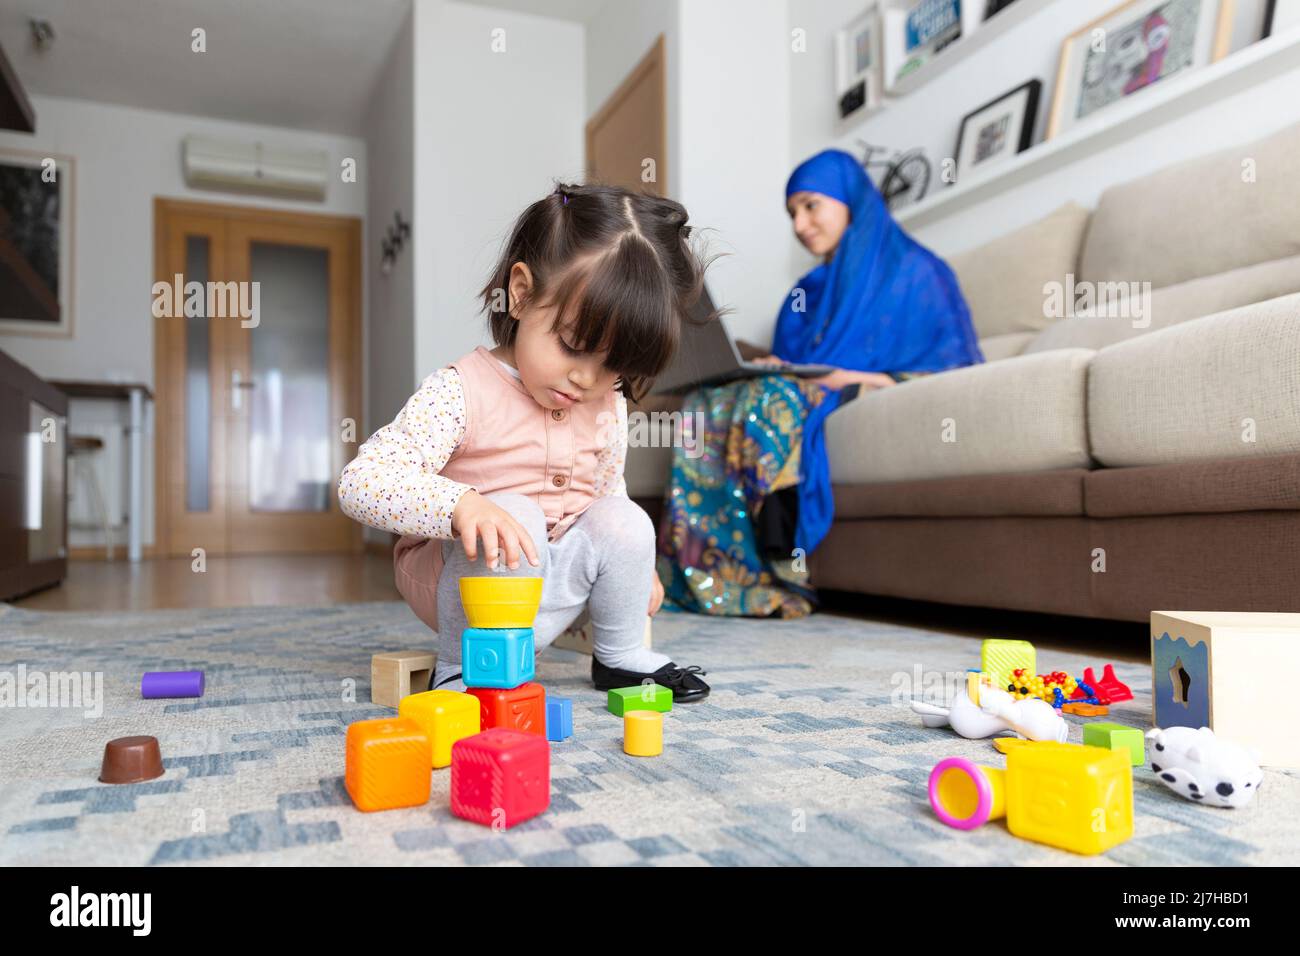 Concept of single parent family. Little child playing while young Muslim woman works from home with laptop computer. Stock Photo